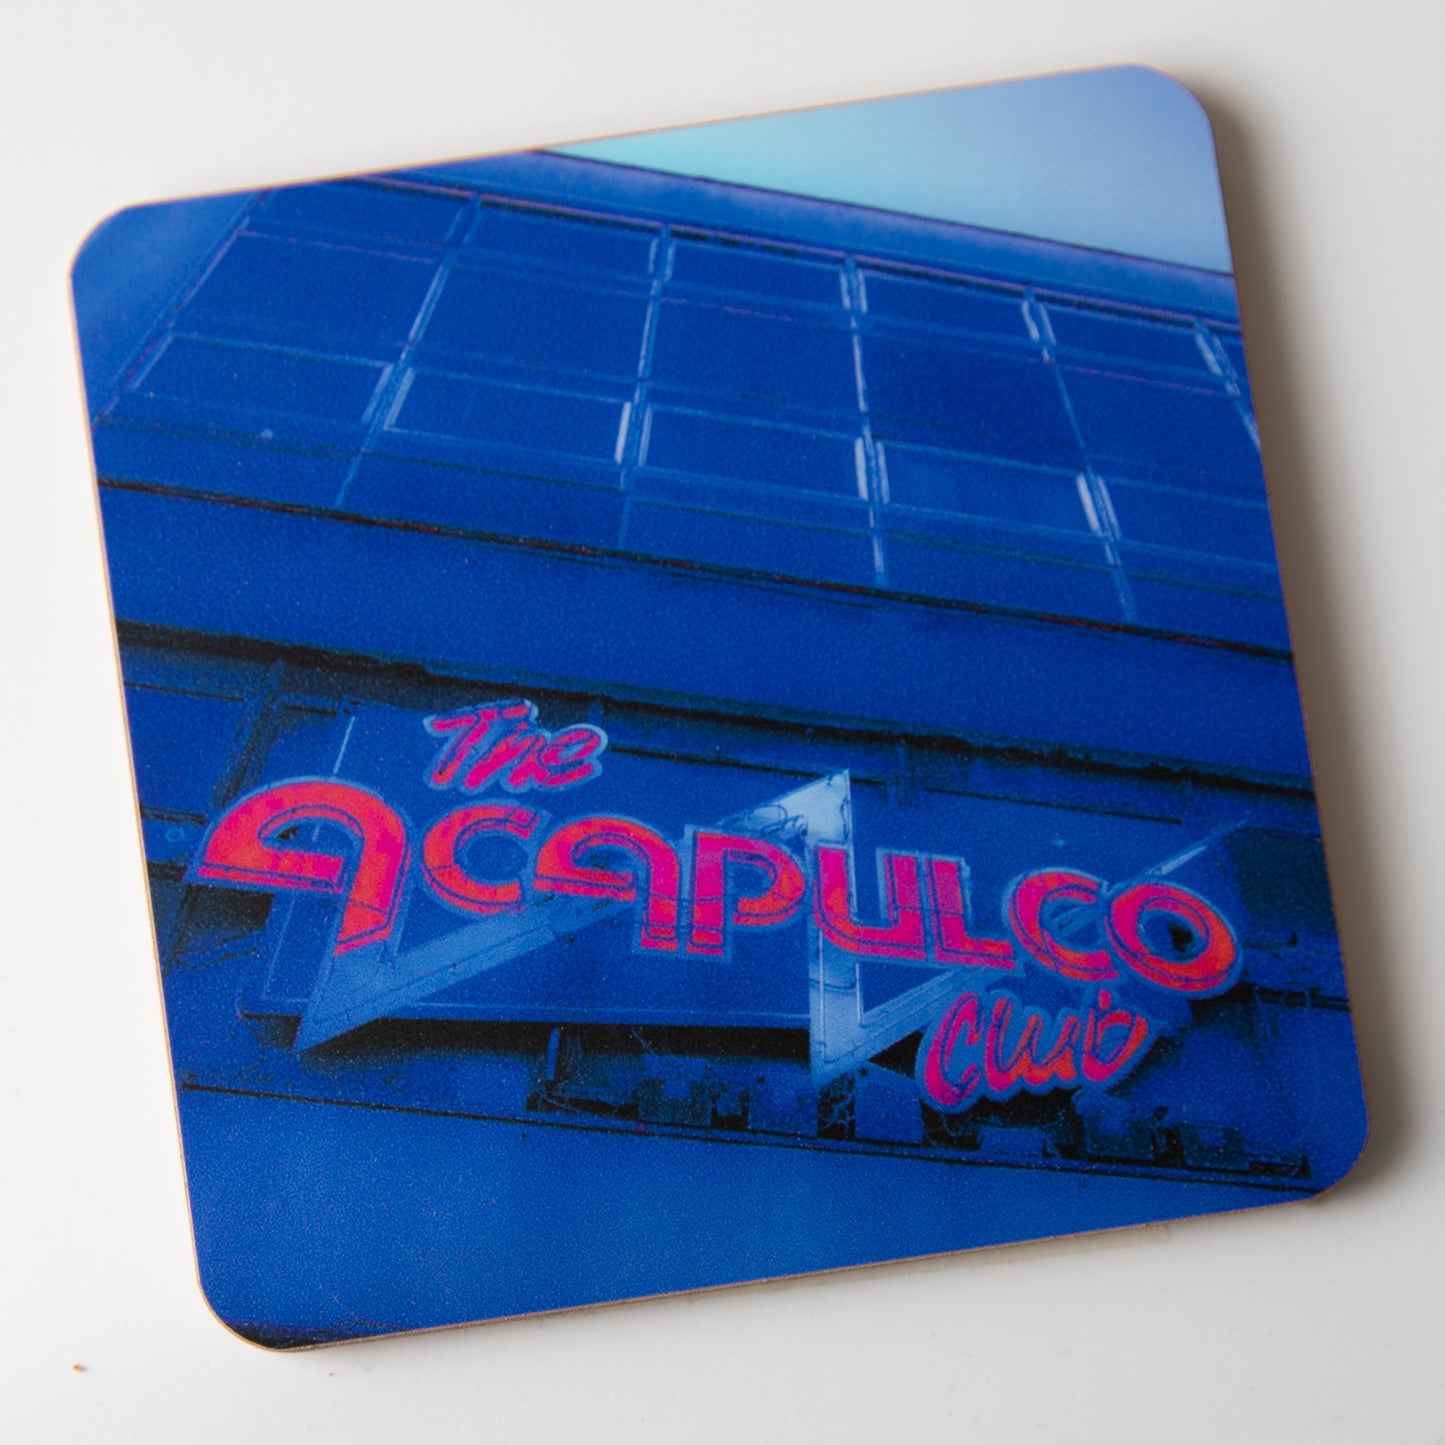 Acapulco Halifax coaster 1 - Blue and Red